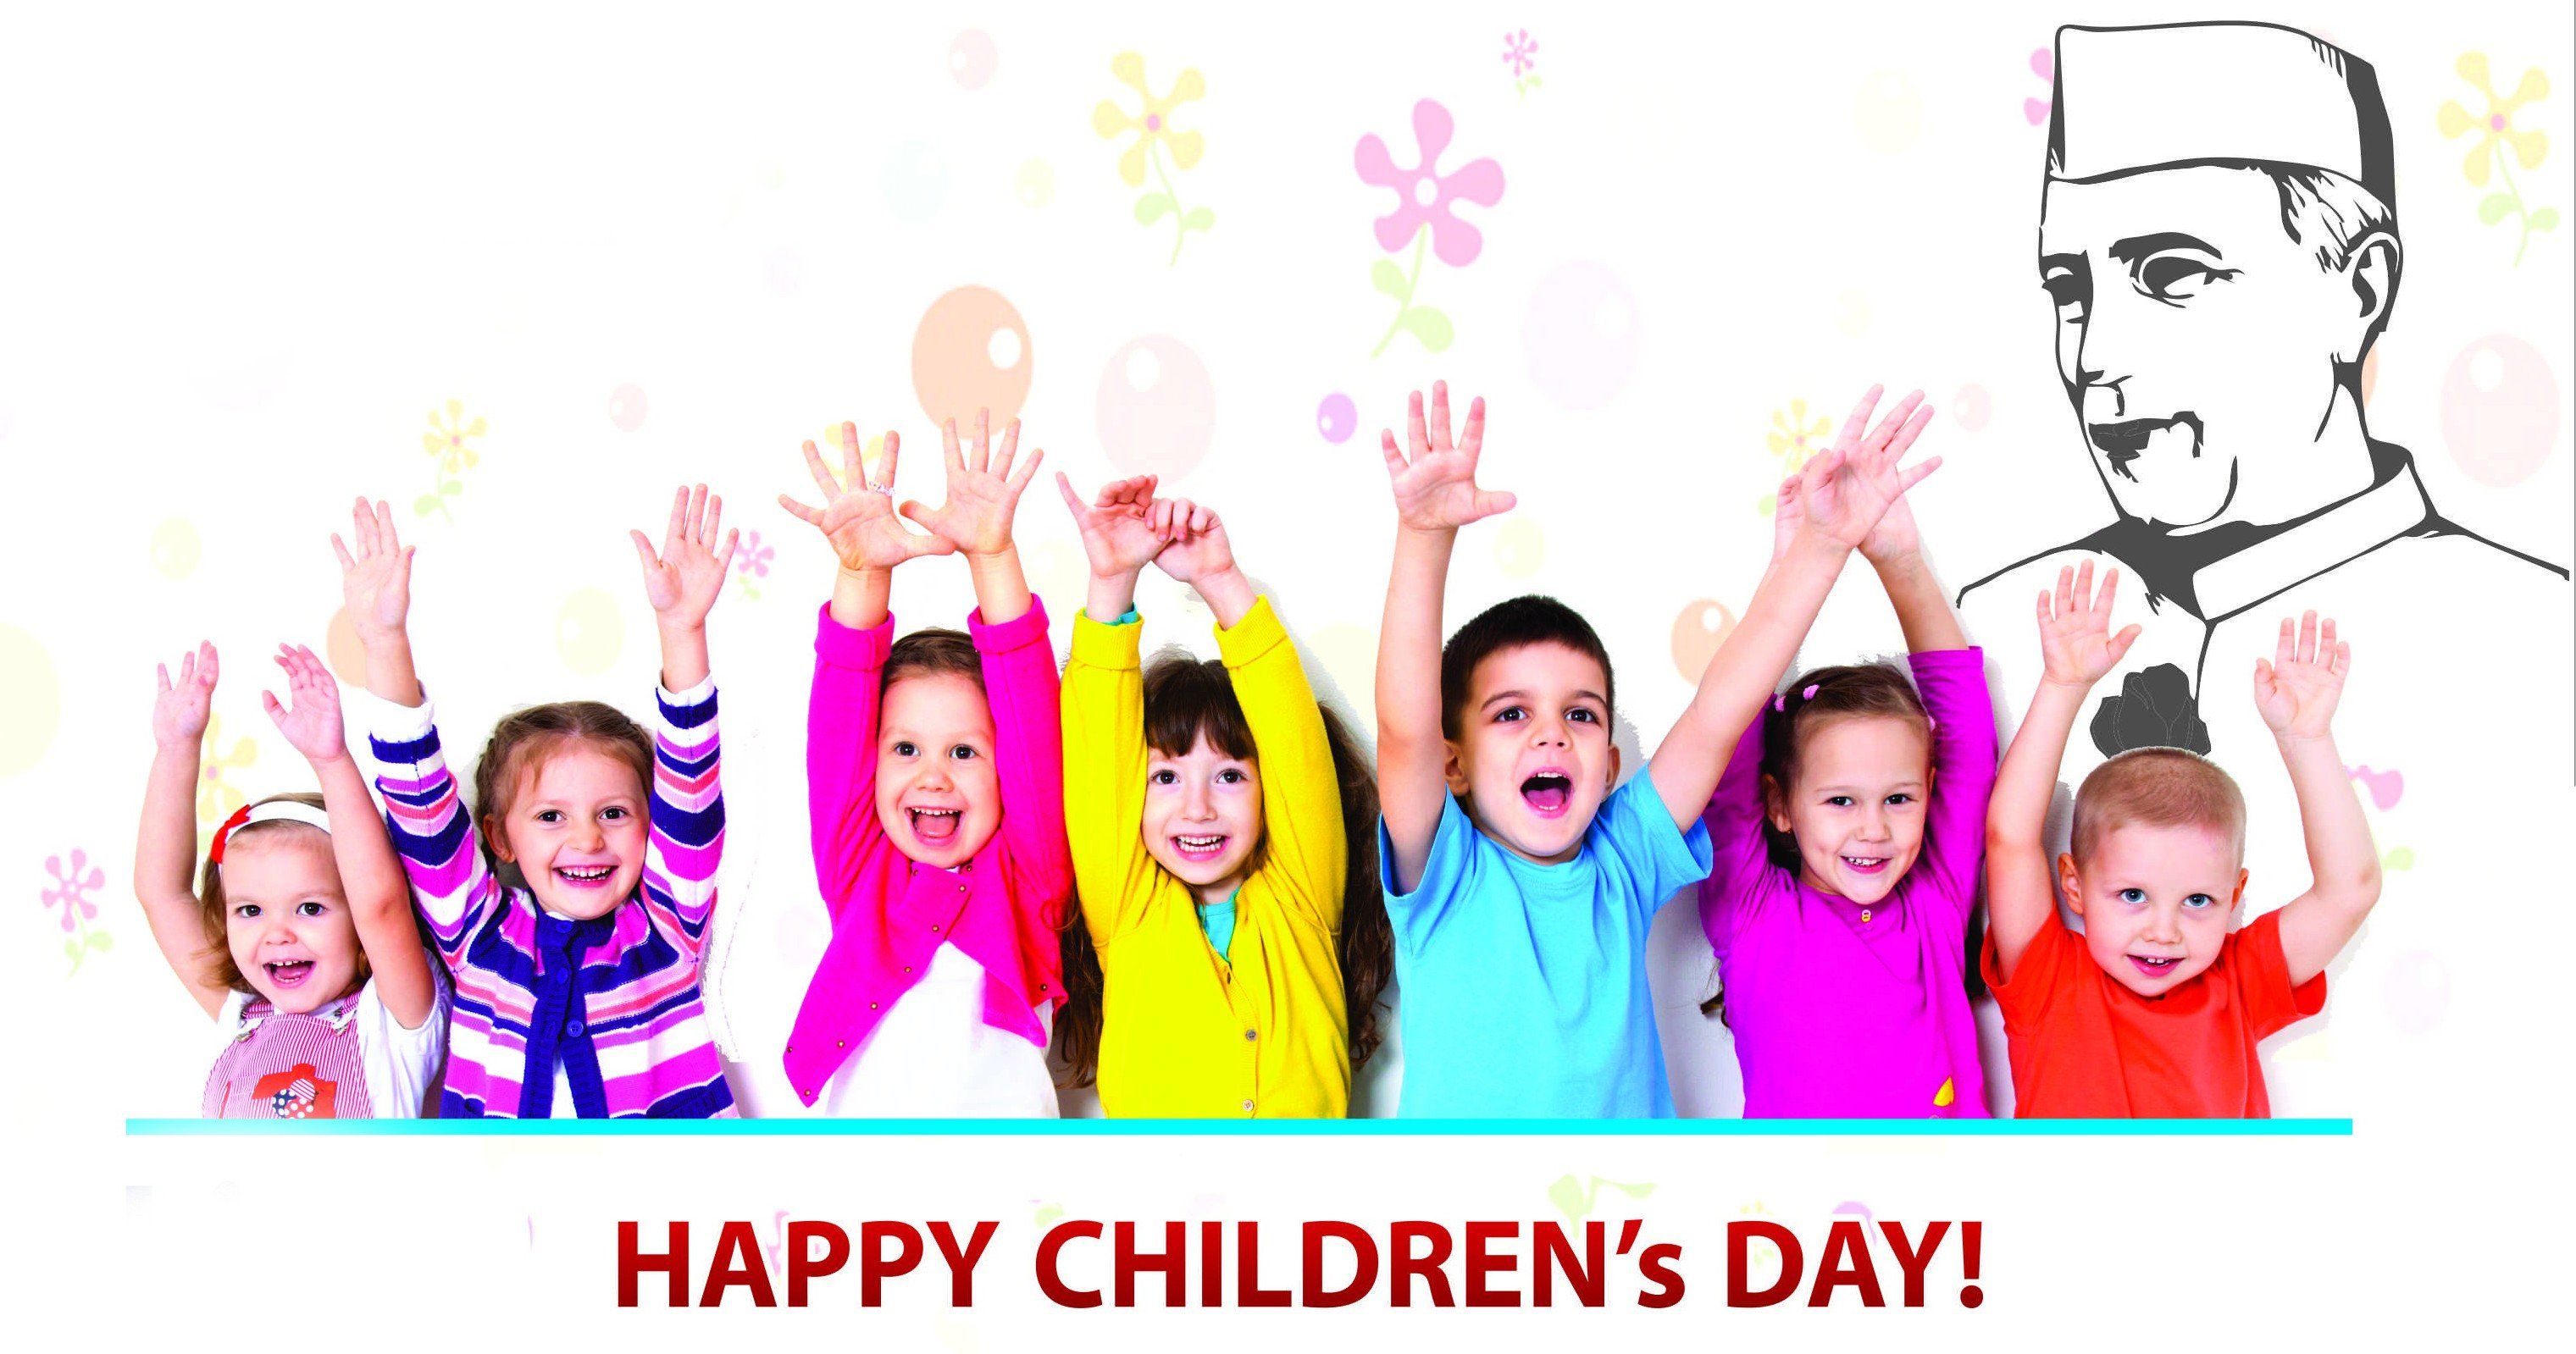 Happy Children's Day Images, Hd Wallpapers - Children's Emotional Well Being , HD Wallpaper & Backgrounds